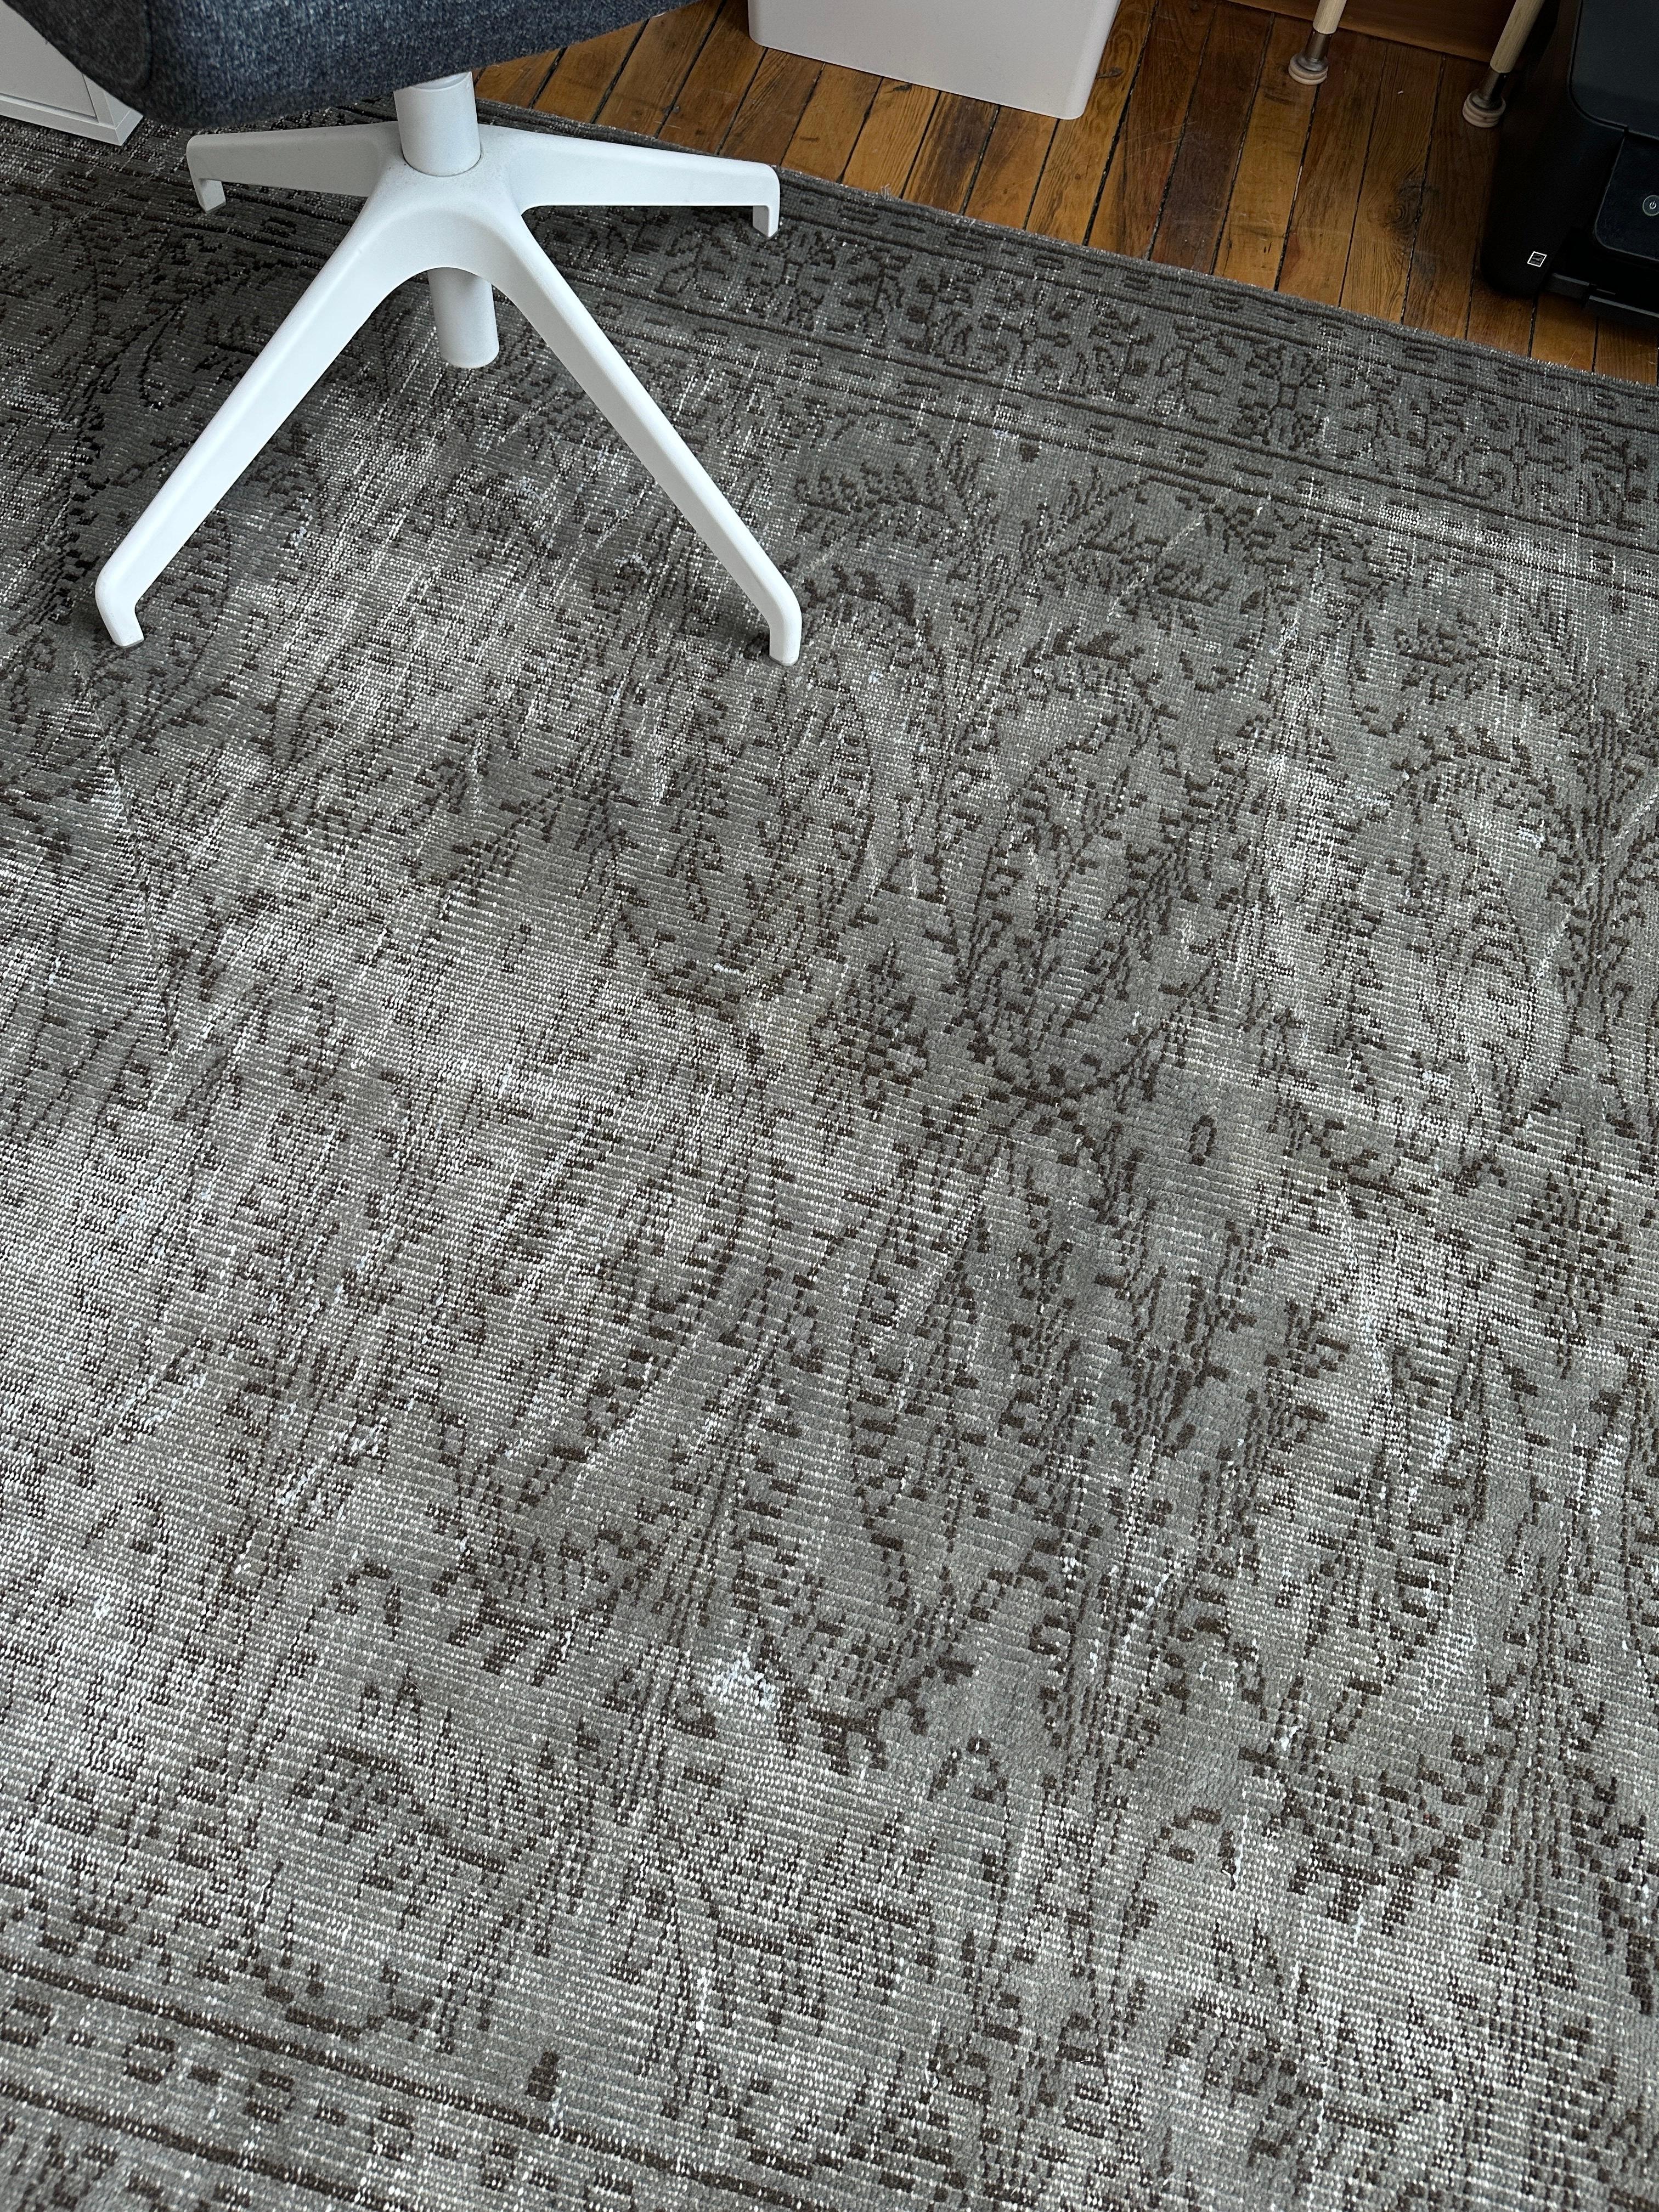 Mid-20th Century Midcentury Handmade Turkish Wool Area Rug in Gray for Modern Interiors For Sale